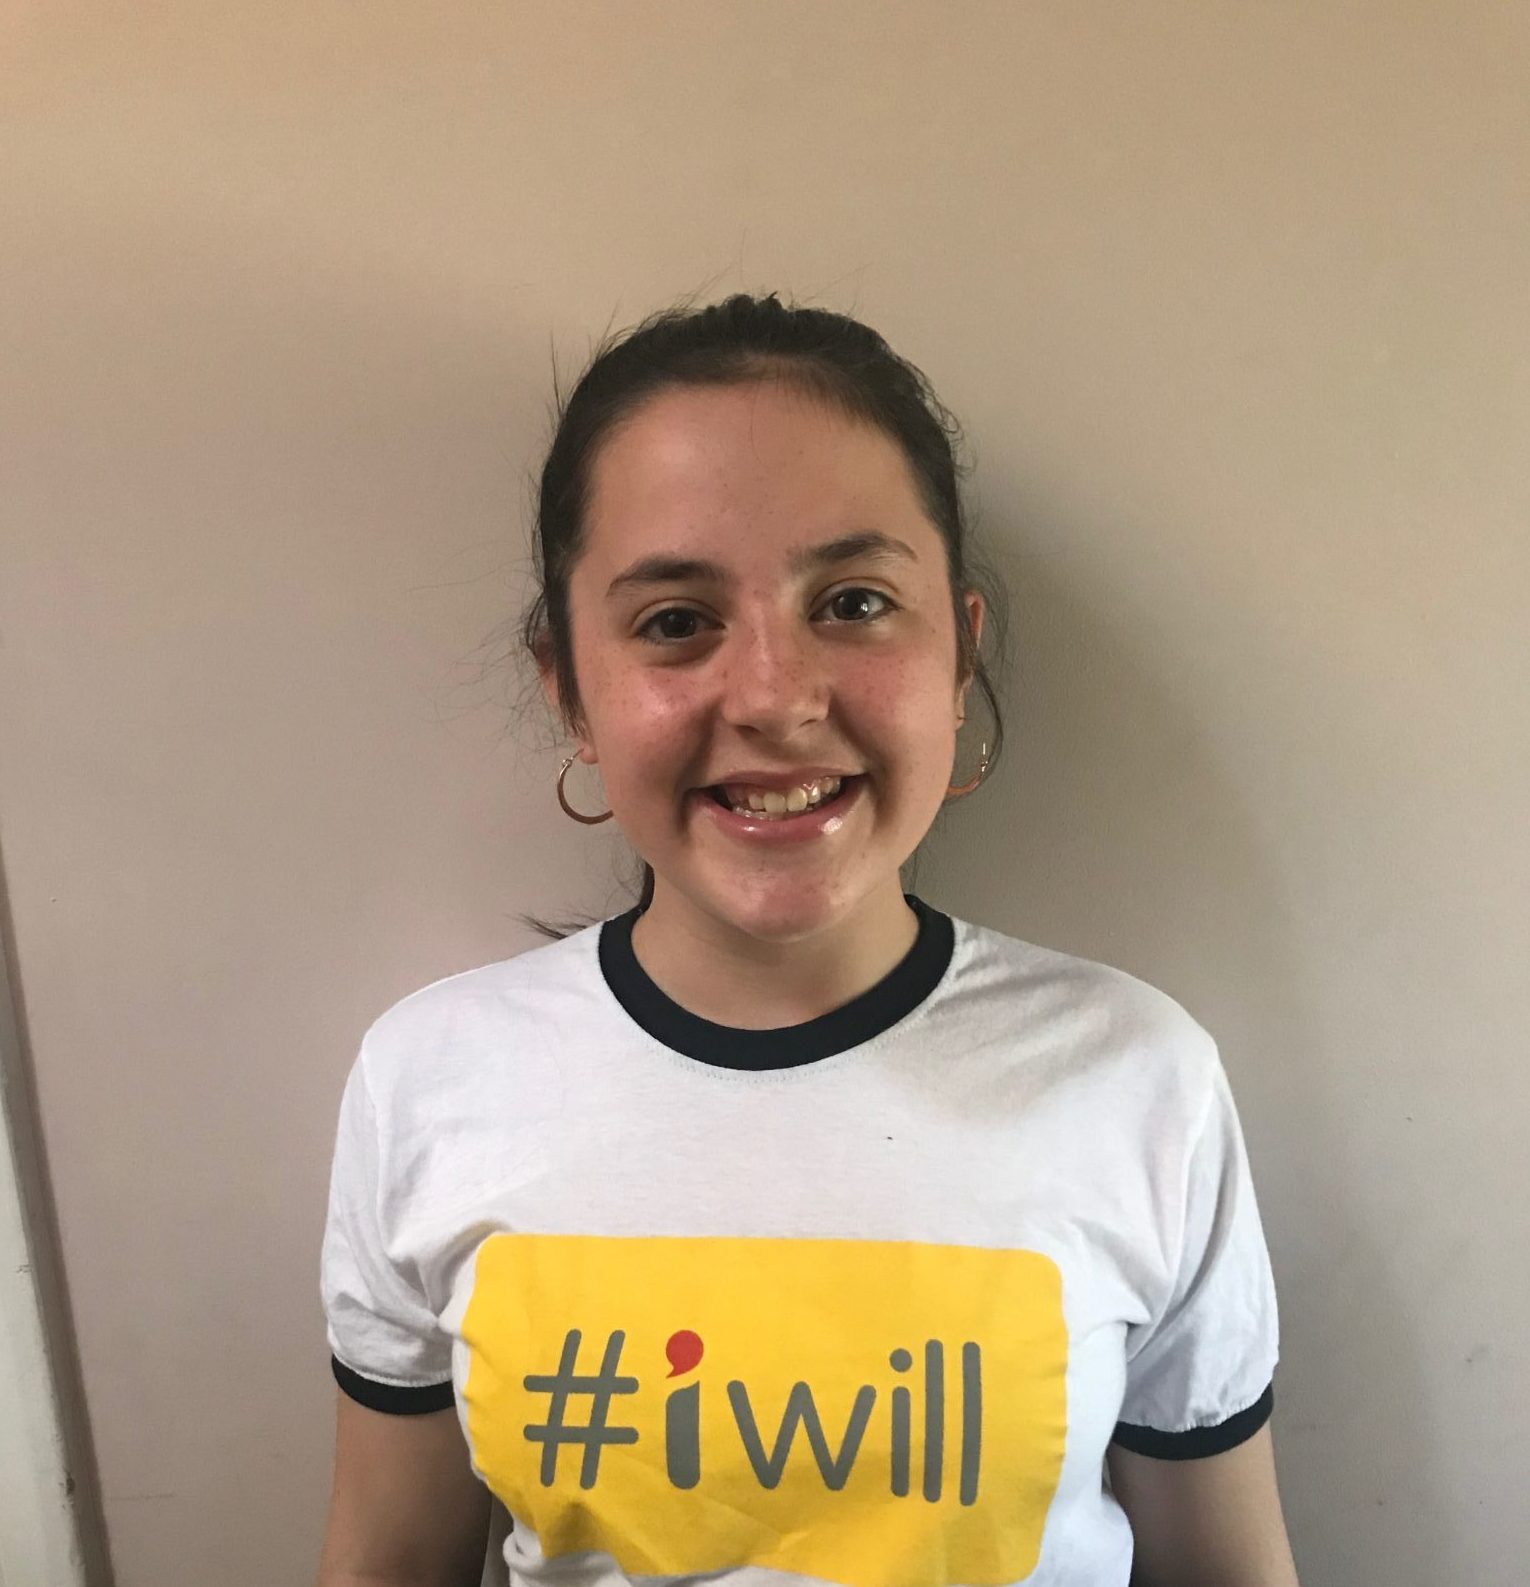 Picture of Ella smiling and wearing a t-shirt with the #iwill logo on